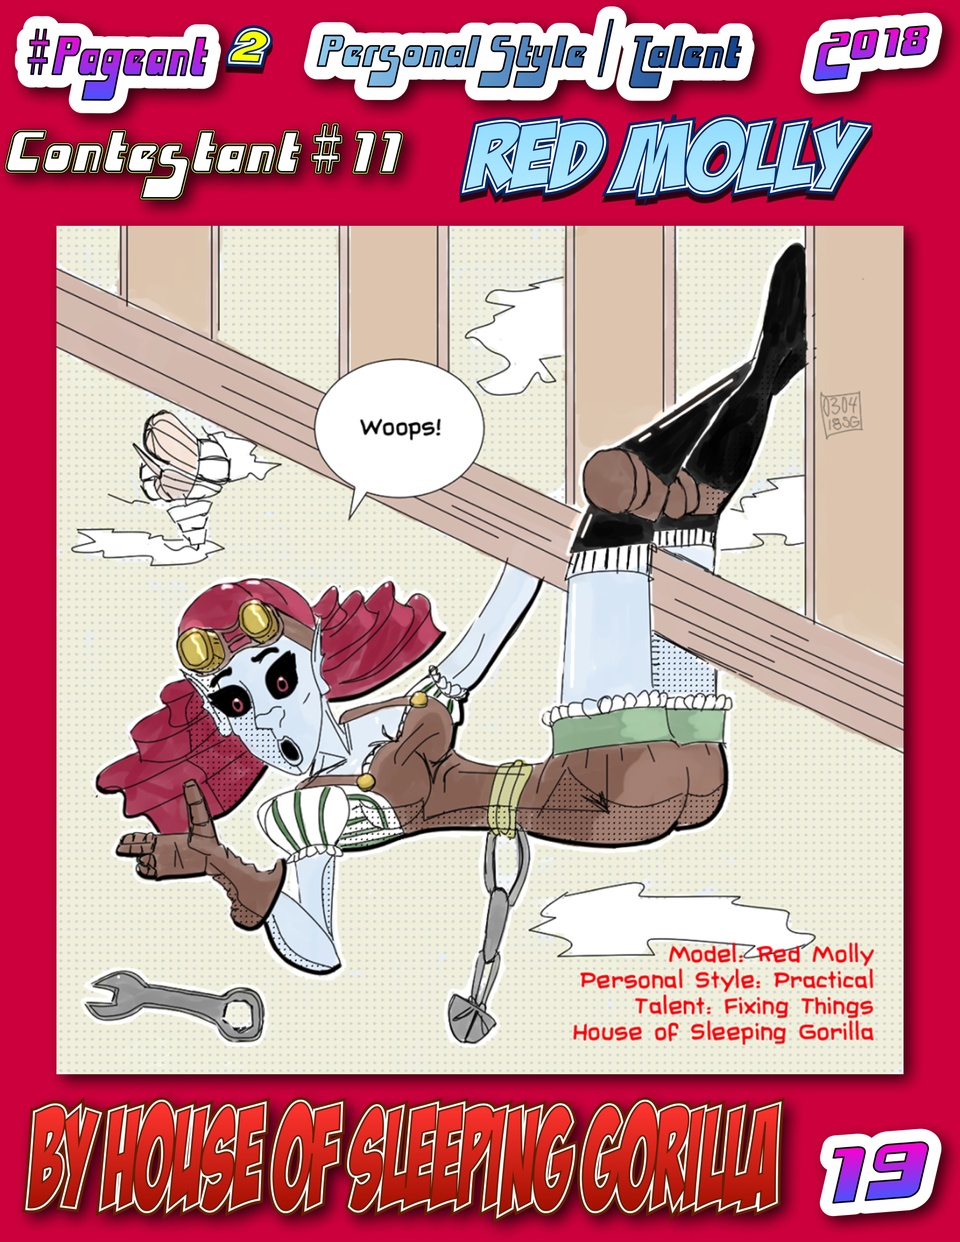 #Pageant #2 Pg. 19 : Personal Style / Talent Category : Contestant #11 : Red Molly